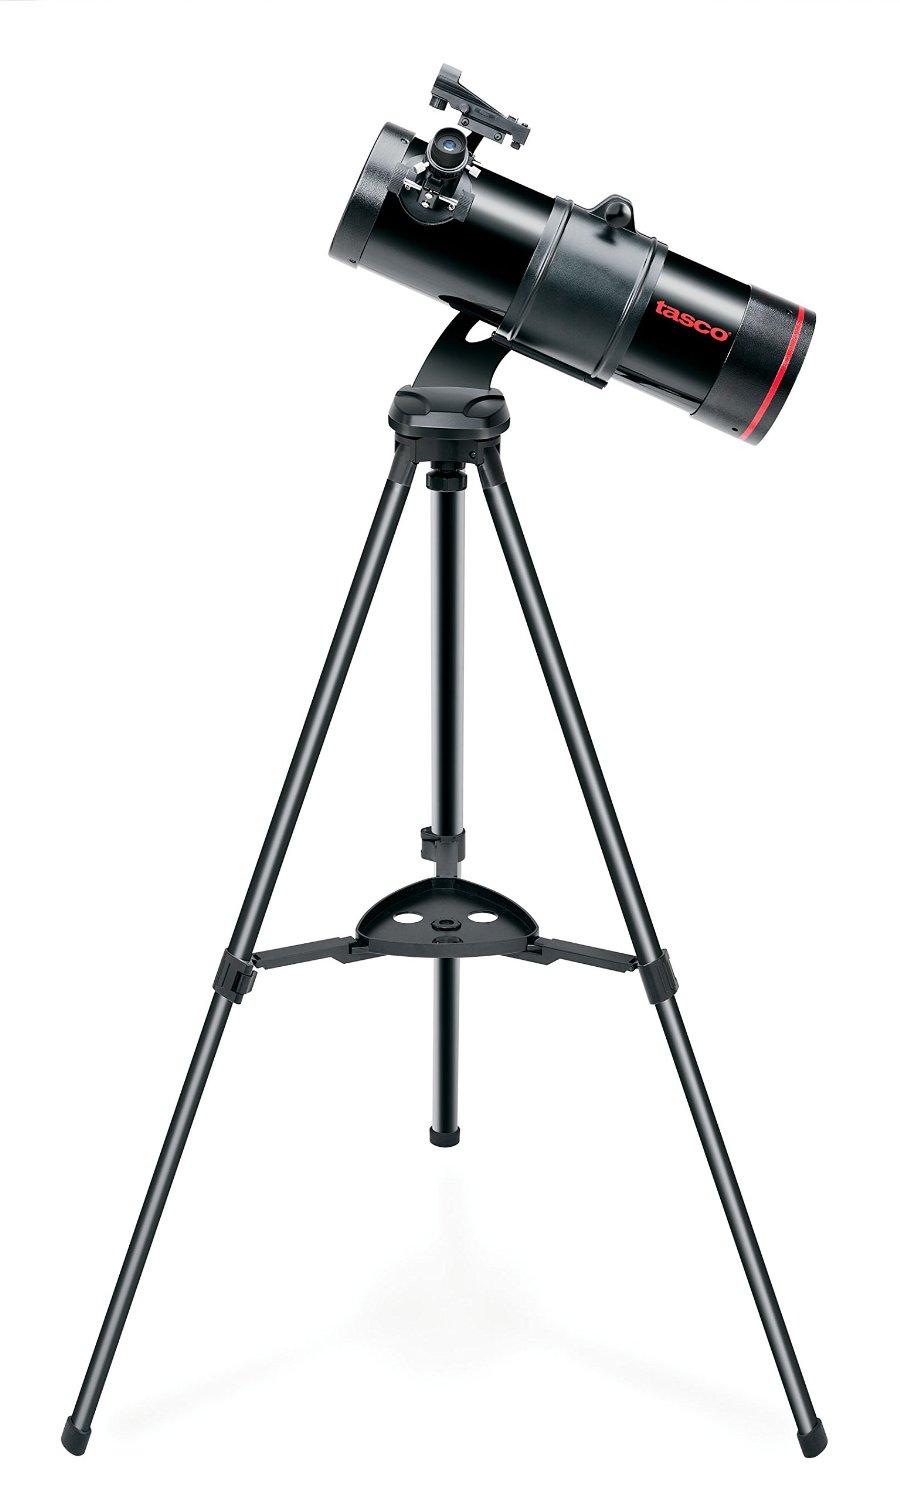 49114500 Tasco Spacestation 114x500mm Reflector ST with Variable LED Red Dot Finderscope Telescope